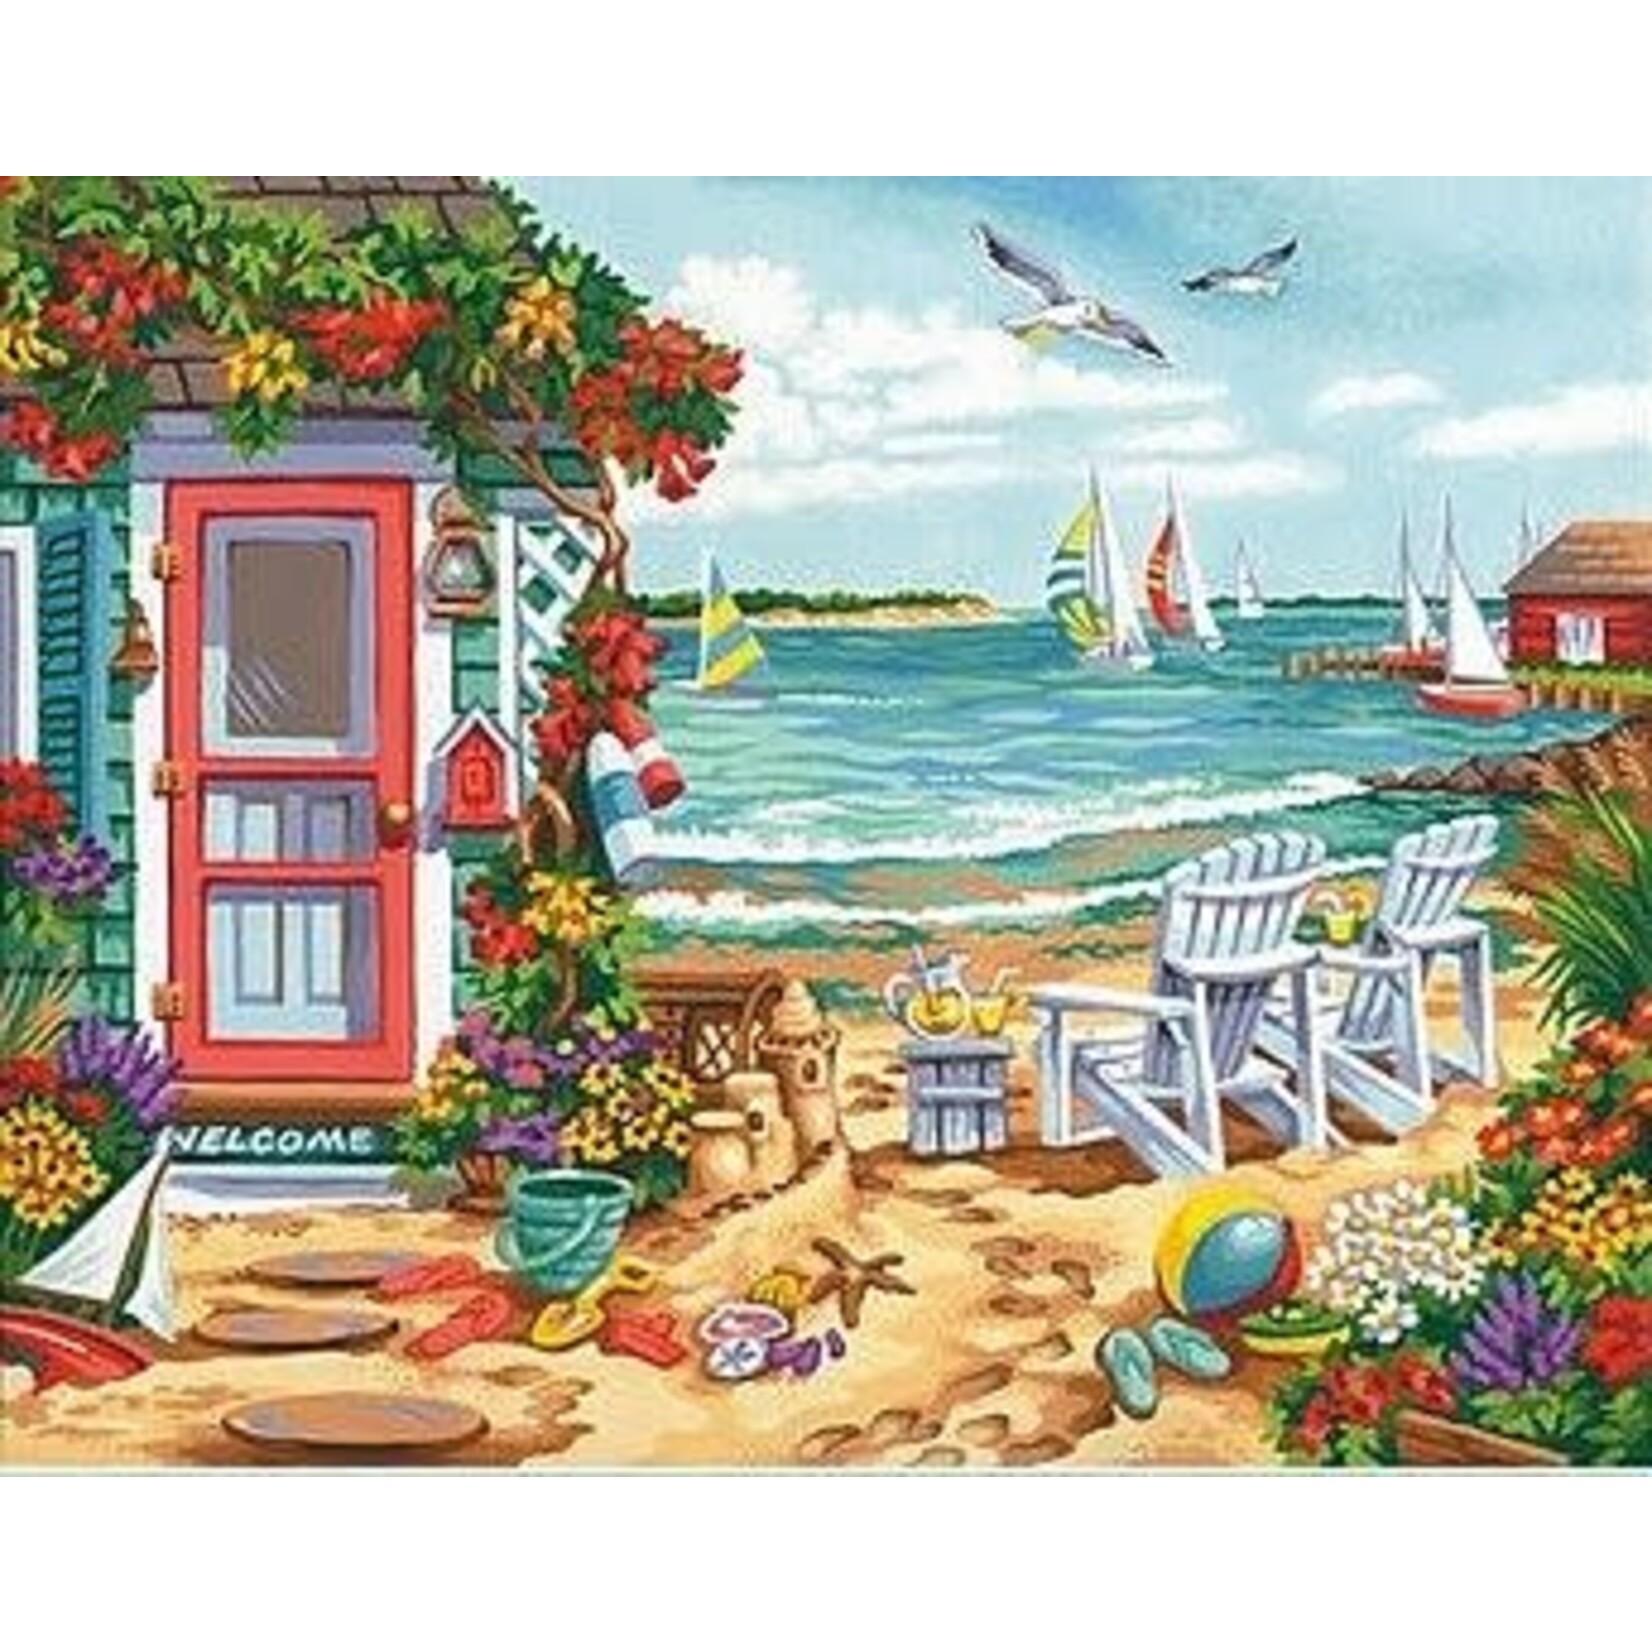 Dimensions Summertime Inlet Paint by Number (Beach, Chairs, House, Sailboats)(14''x11'')